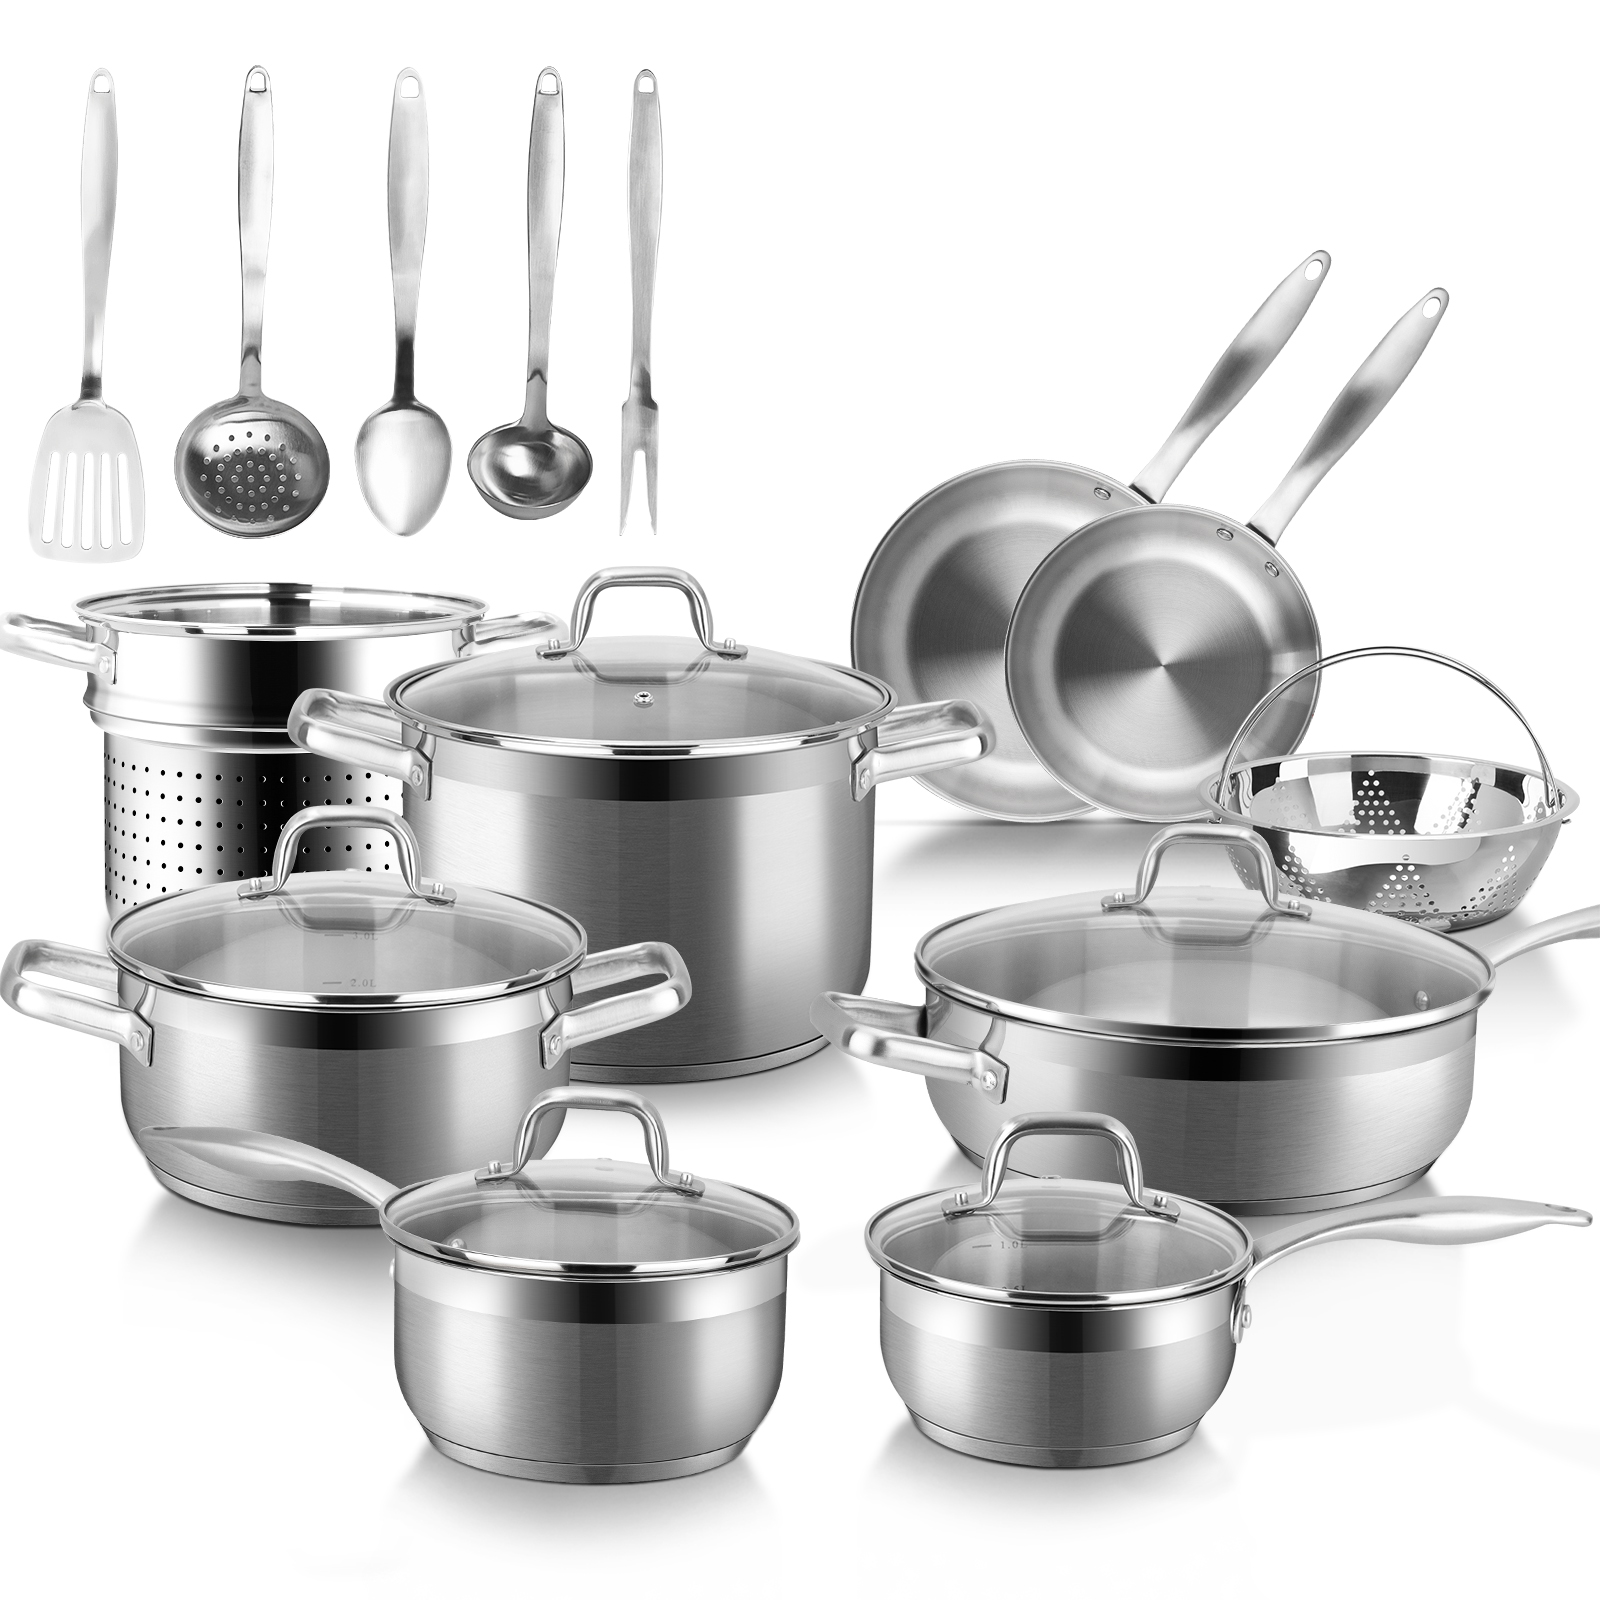 Duxtop 10PC Kitchen Pots and Pans Set, Whole-Clad Tri-Ply Stainless Steel  Induction Cookware Set - The Secura